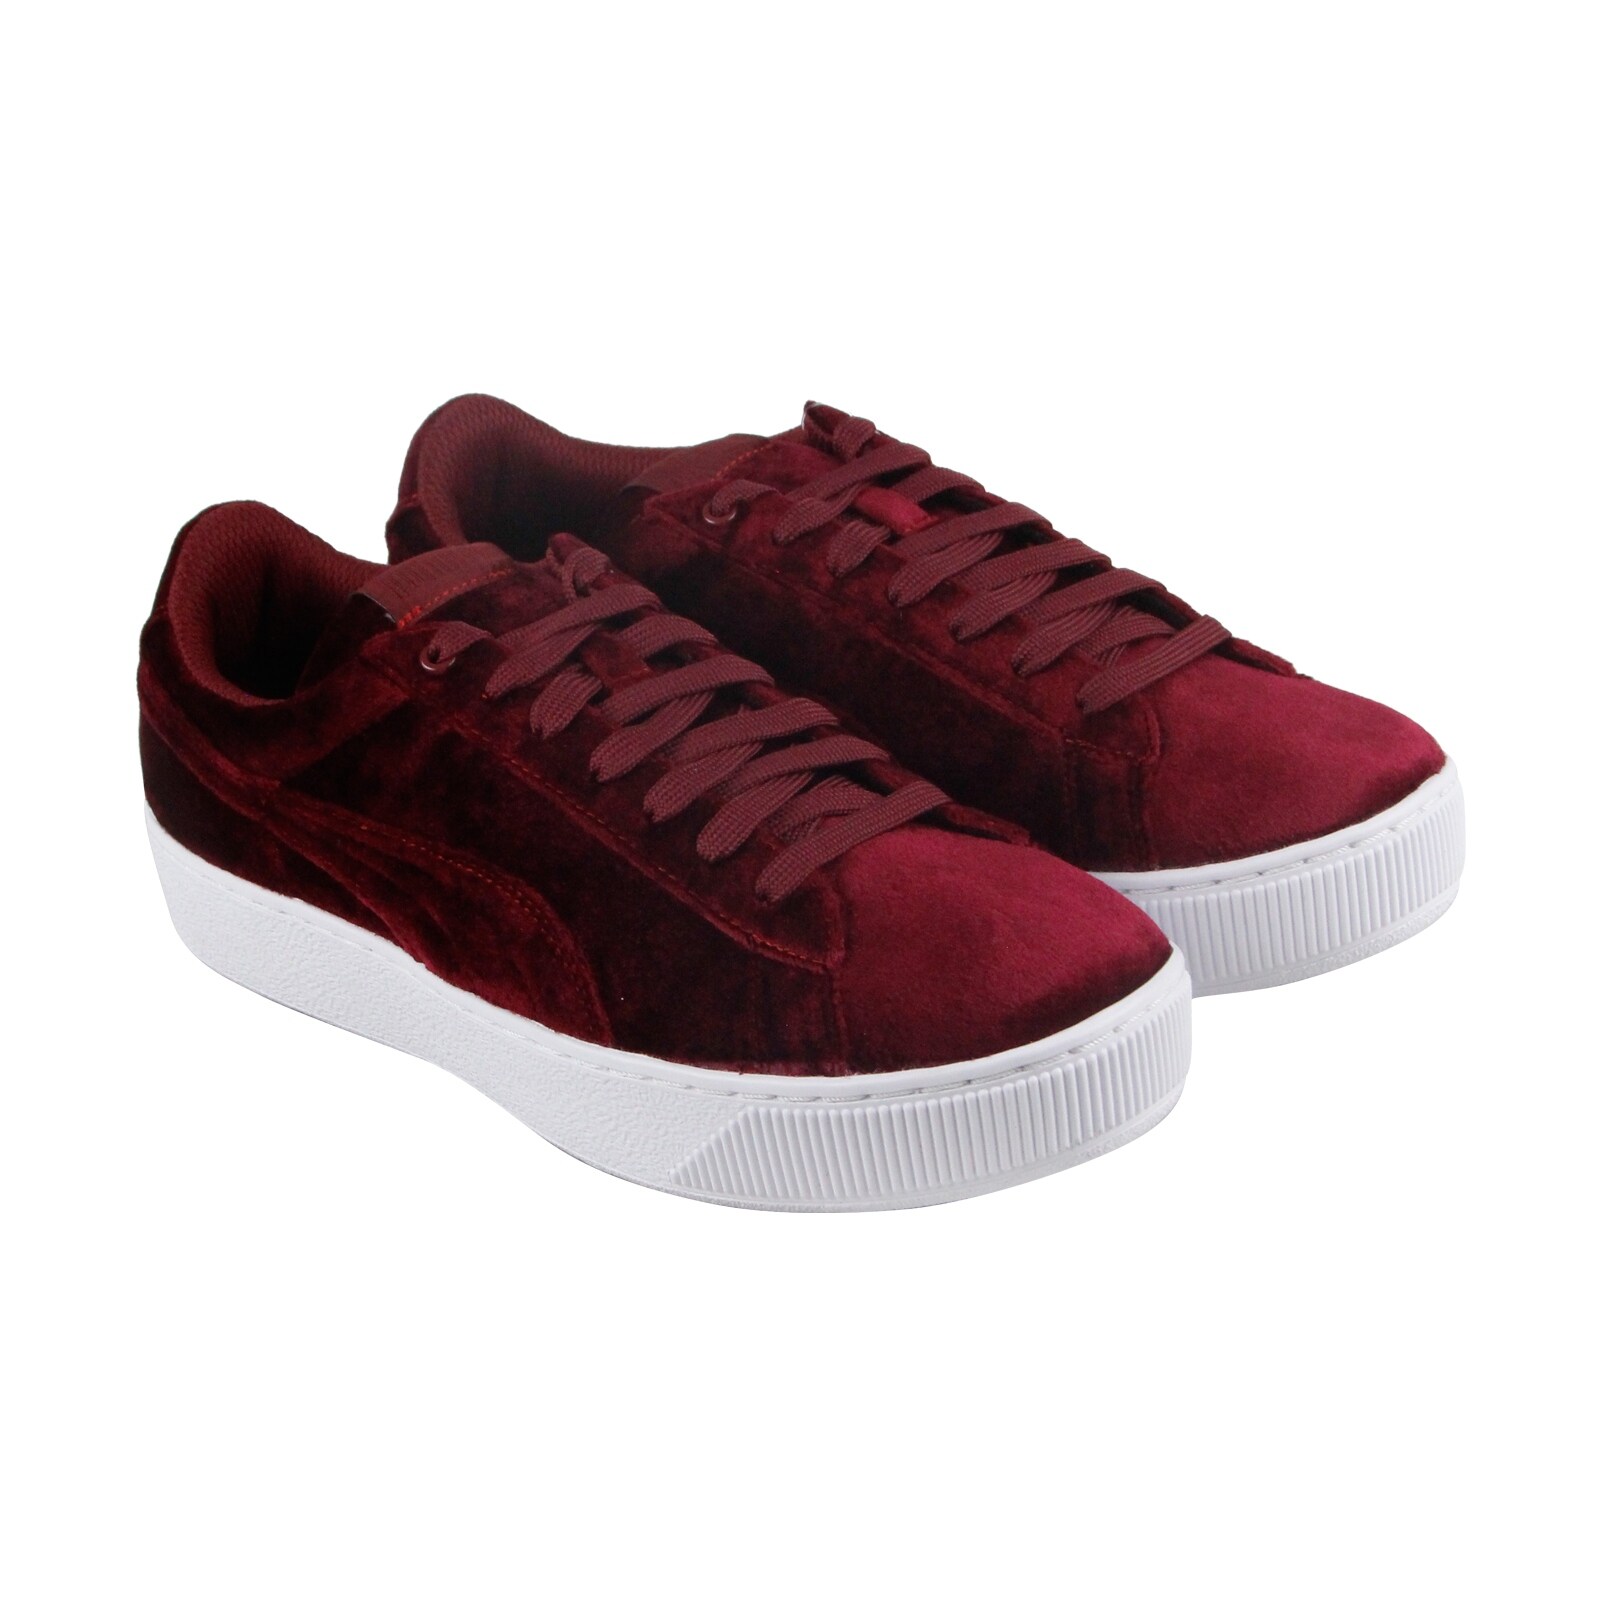 Shop Puma Vikky Platform Vr Bl Womens Red Suede Lace Up Sneakers Shoes -  Overstock - 21729284